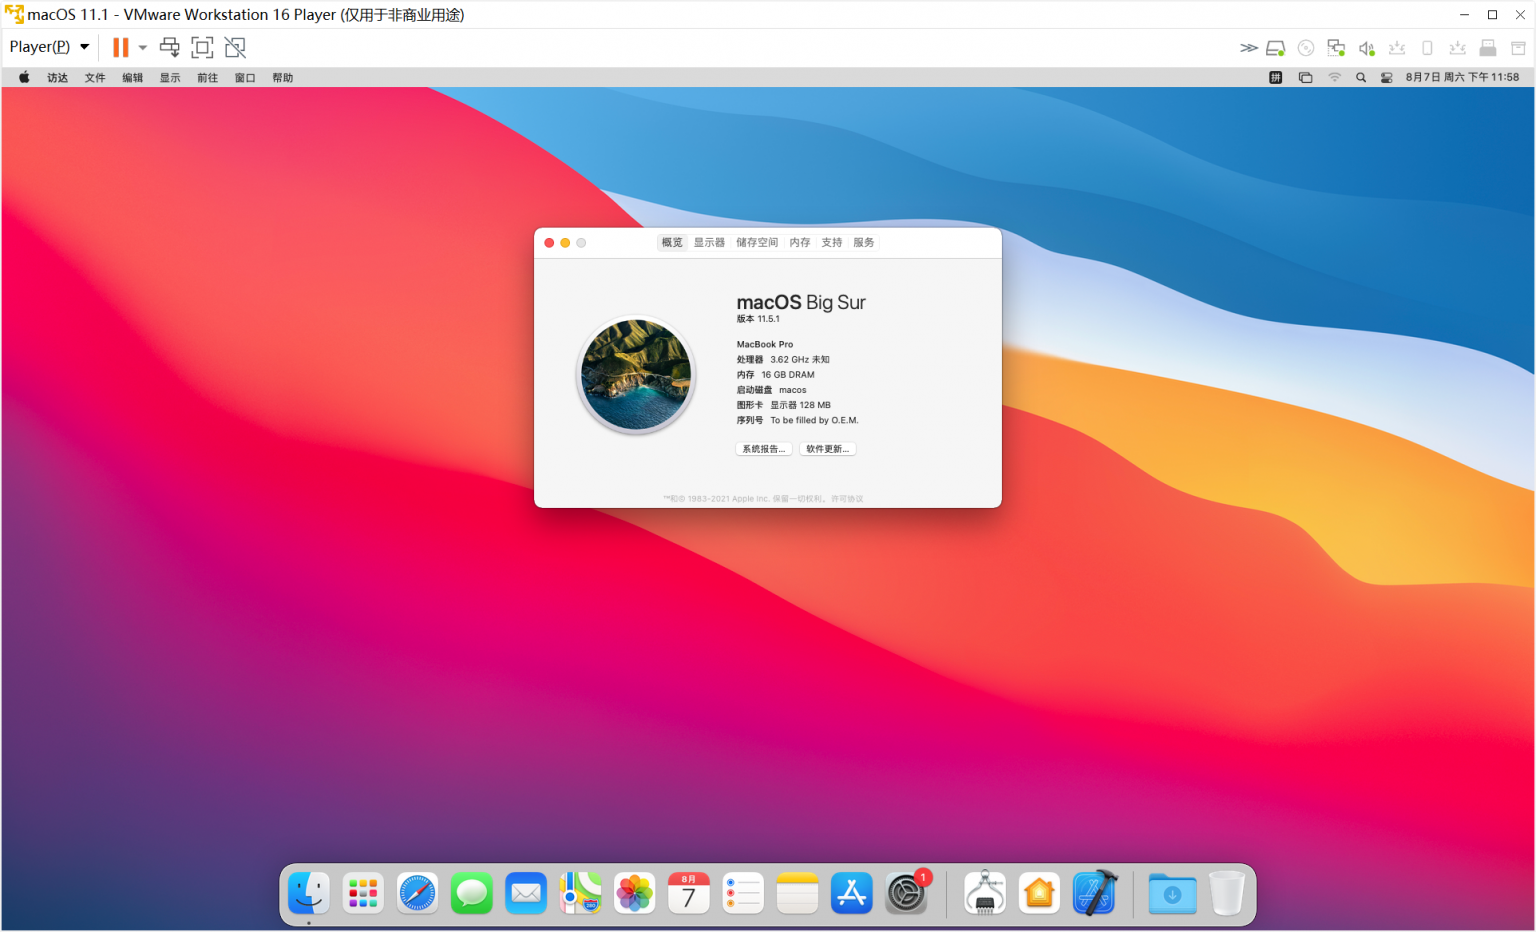 vmware workstation player for macos